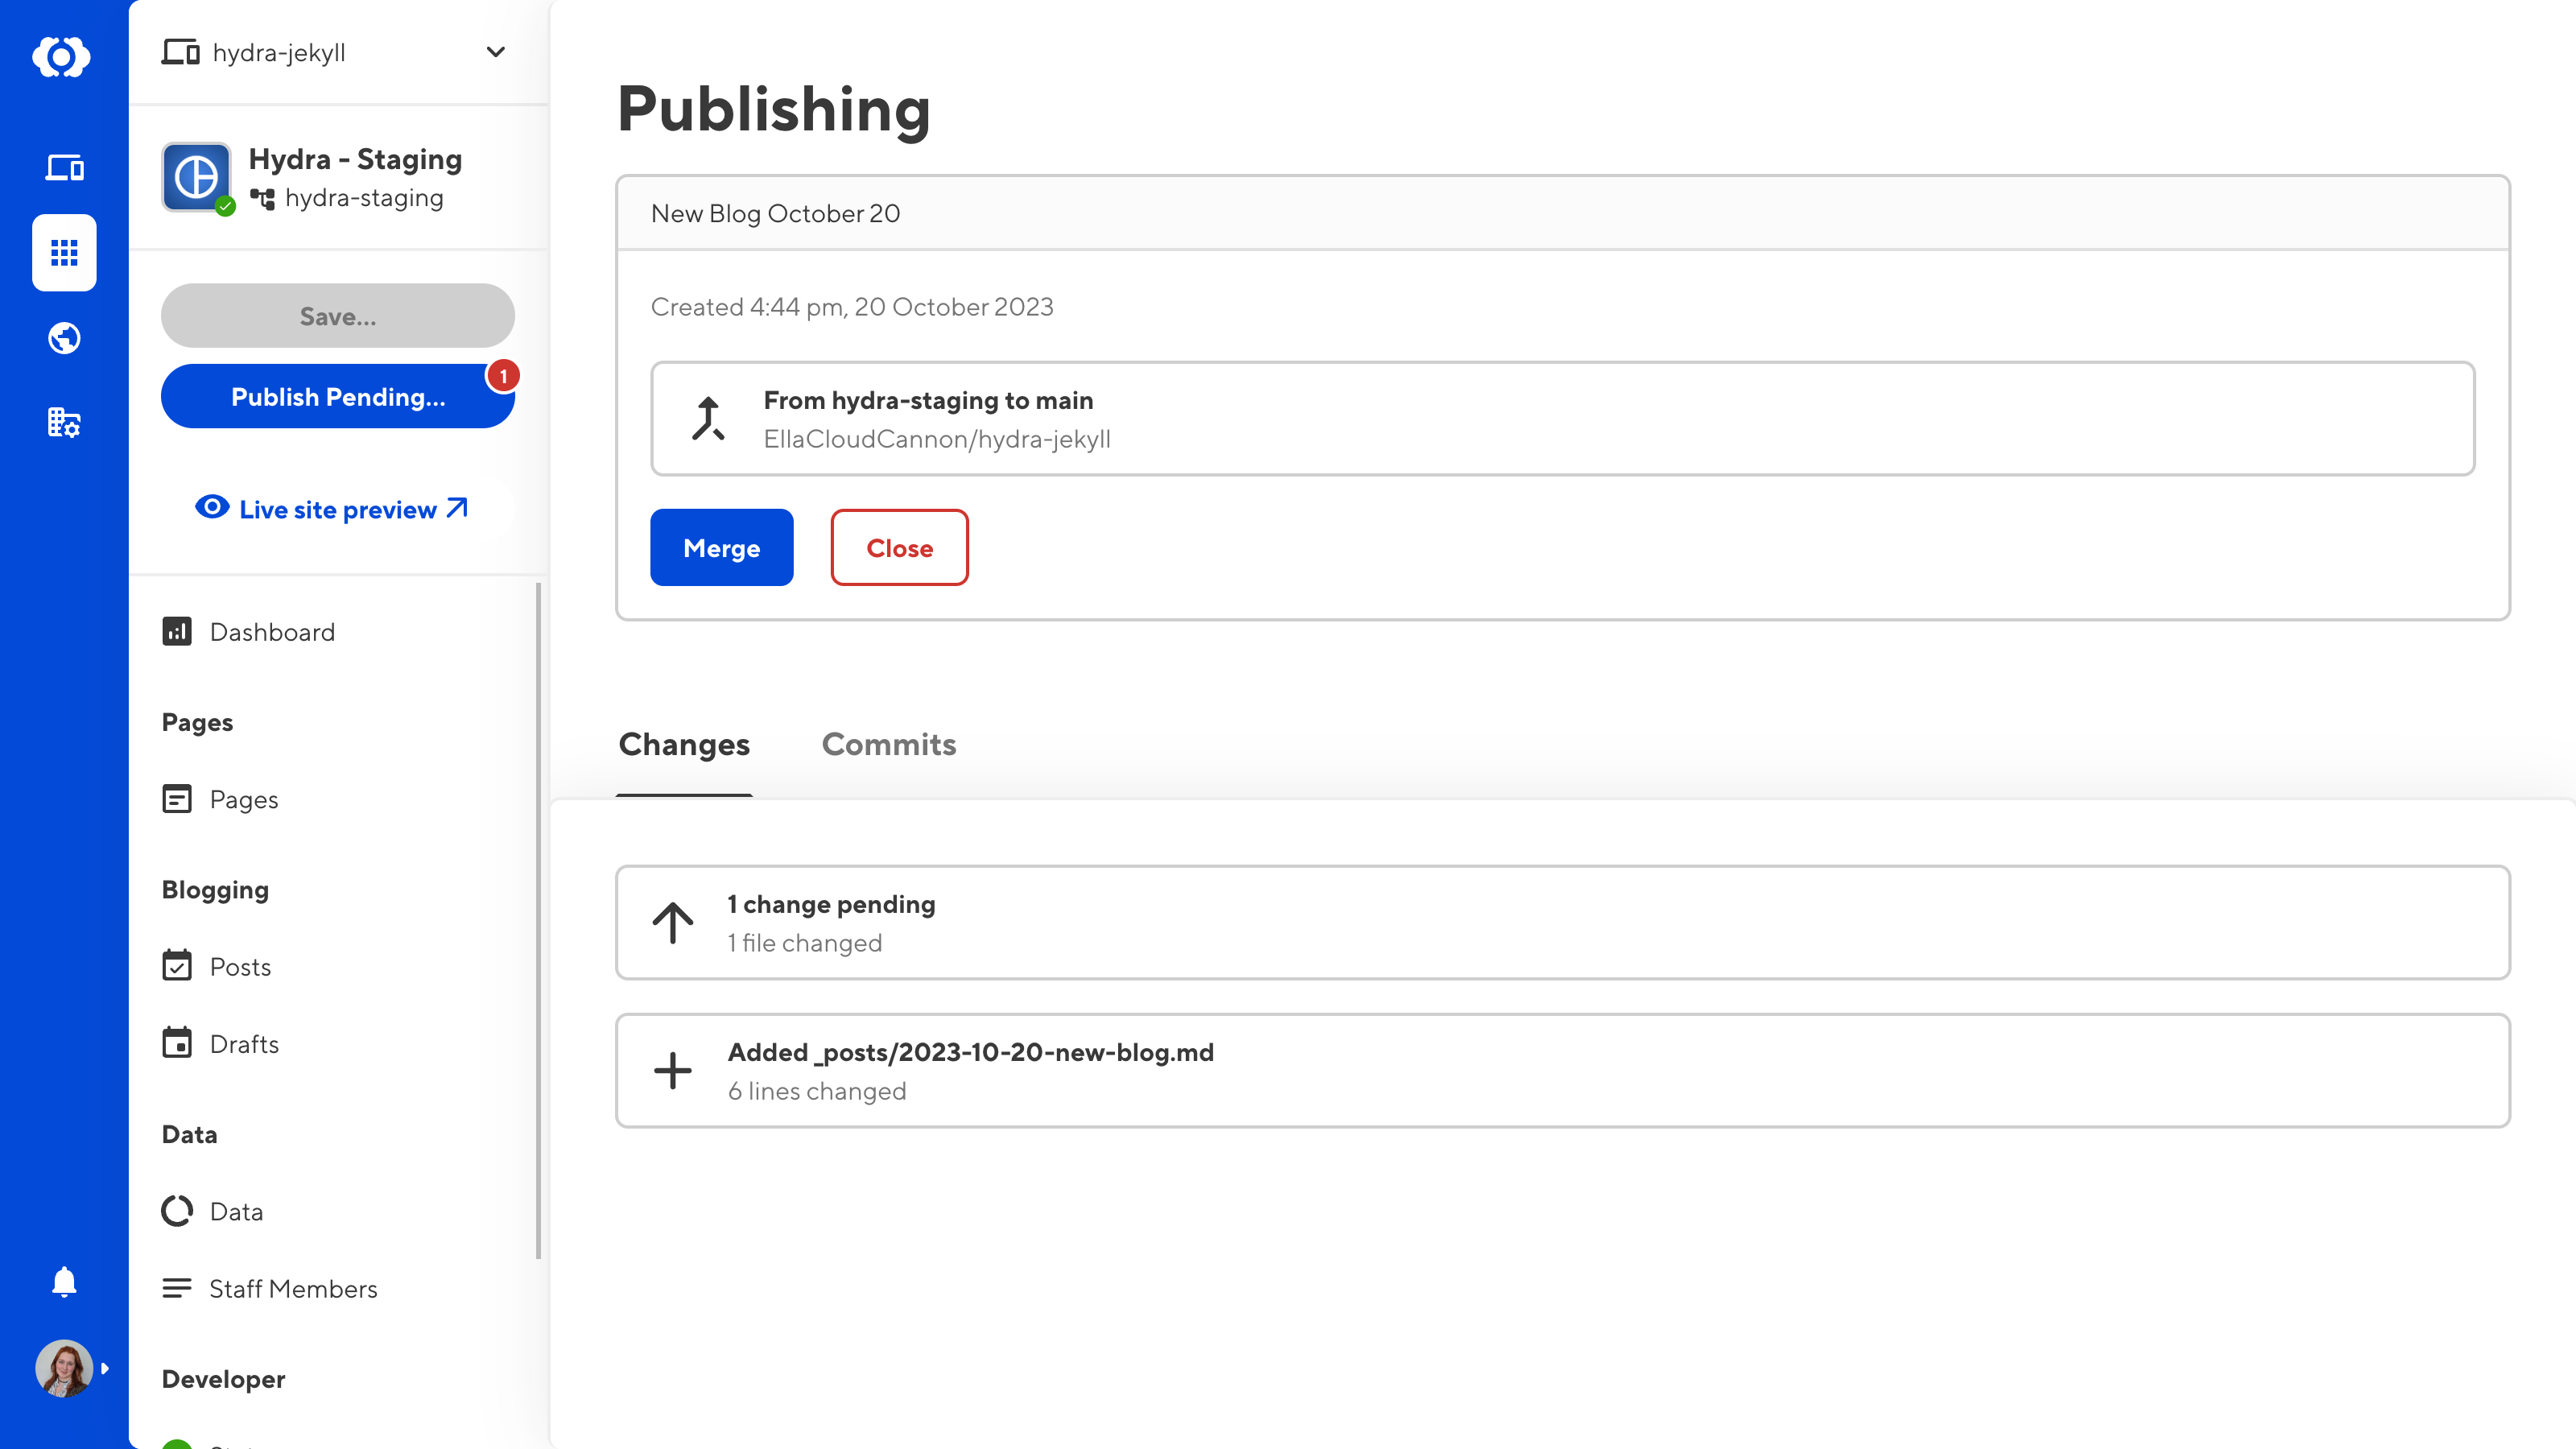 A screenshot of the CloudCannon app shows the Publishing page with a button to Merge or Close a Pull Request and a list of changes.